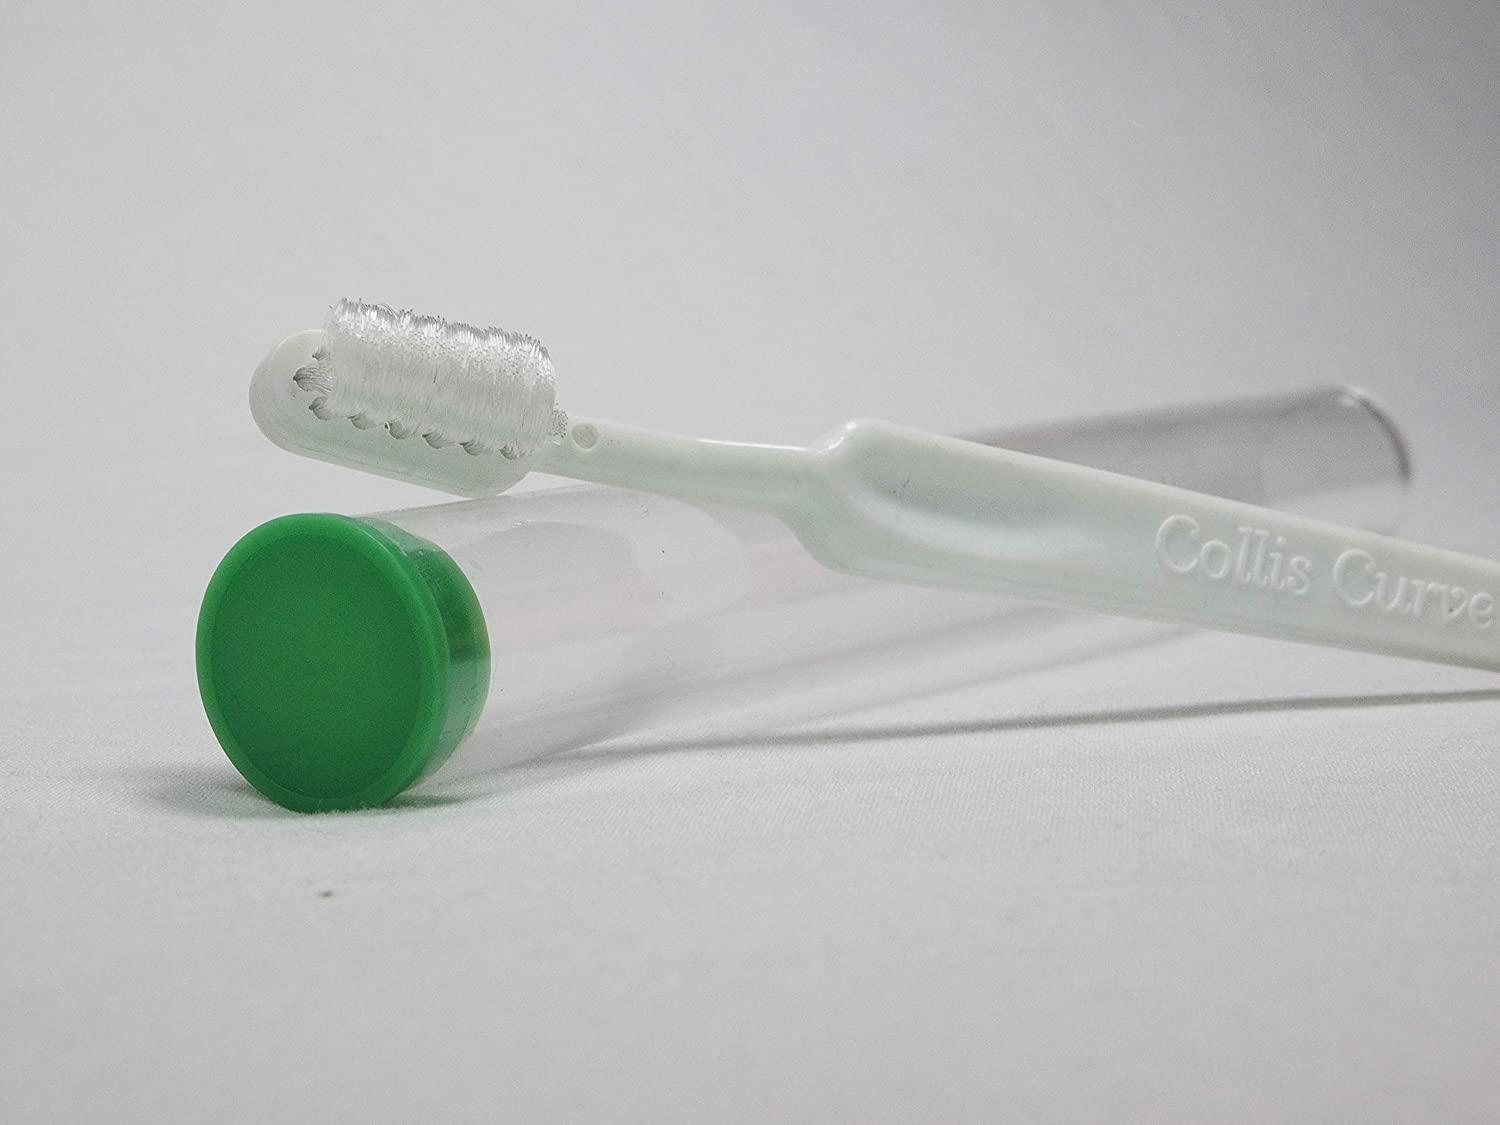 Collis-Curve (TM) Toothbrush Baby and Youth Toothbrush - Anjelstore 